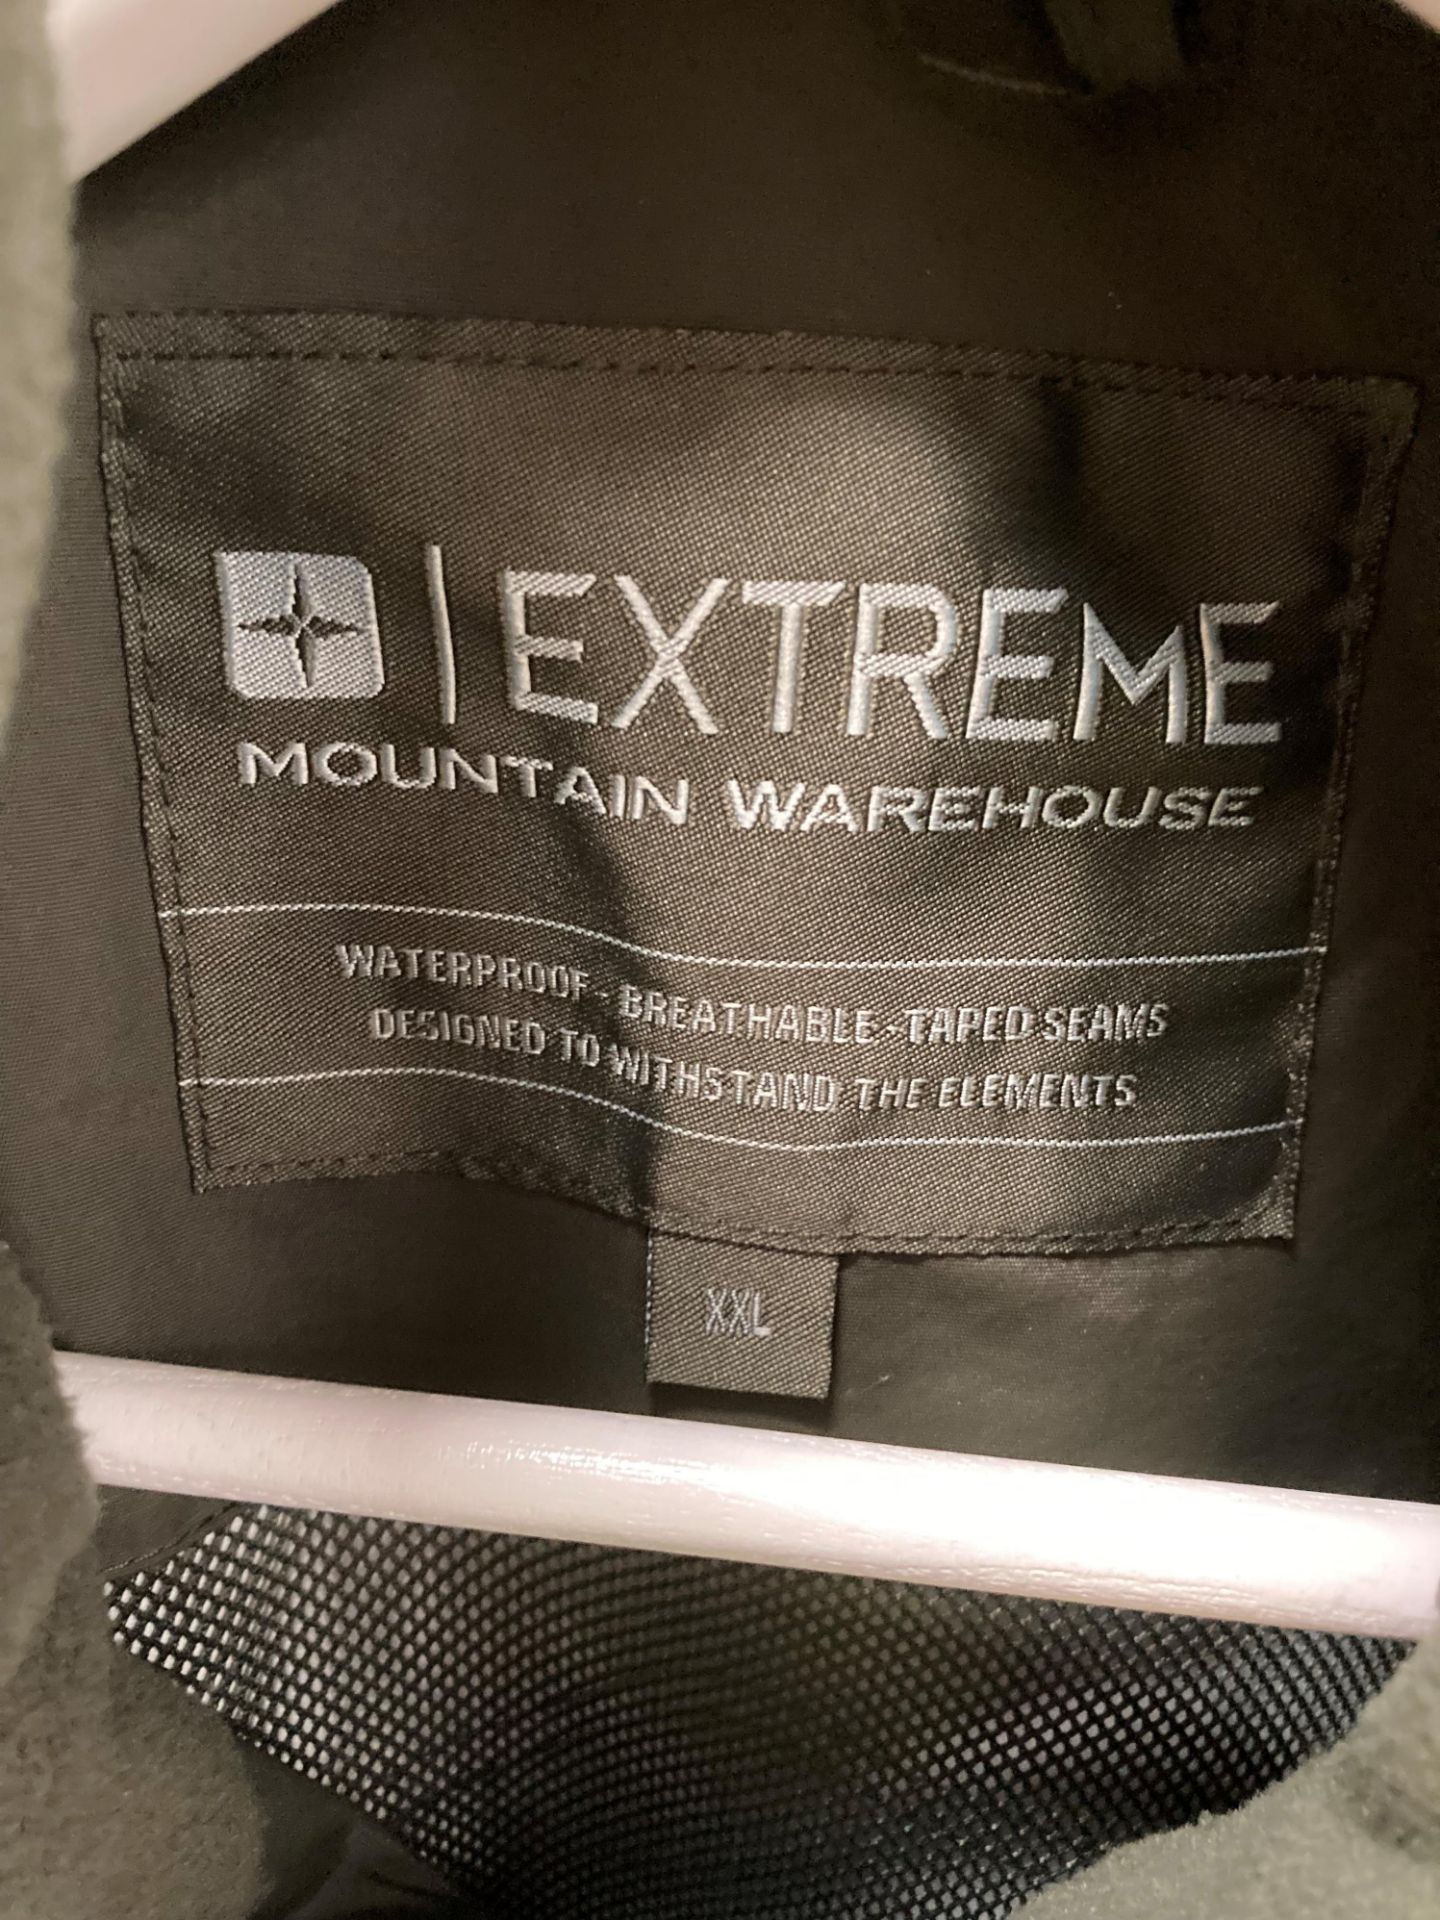 An Extreme by Mountain Warehouse Isodry 10,000 dark green waterproof jacket, - Image 2 of 2